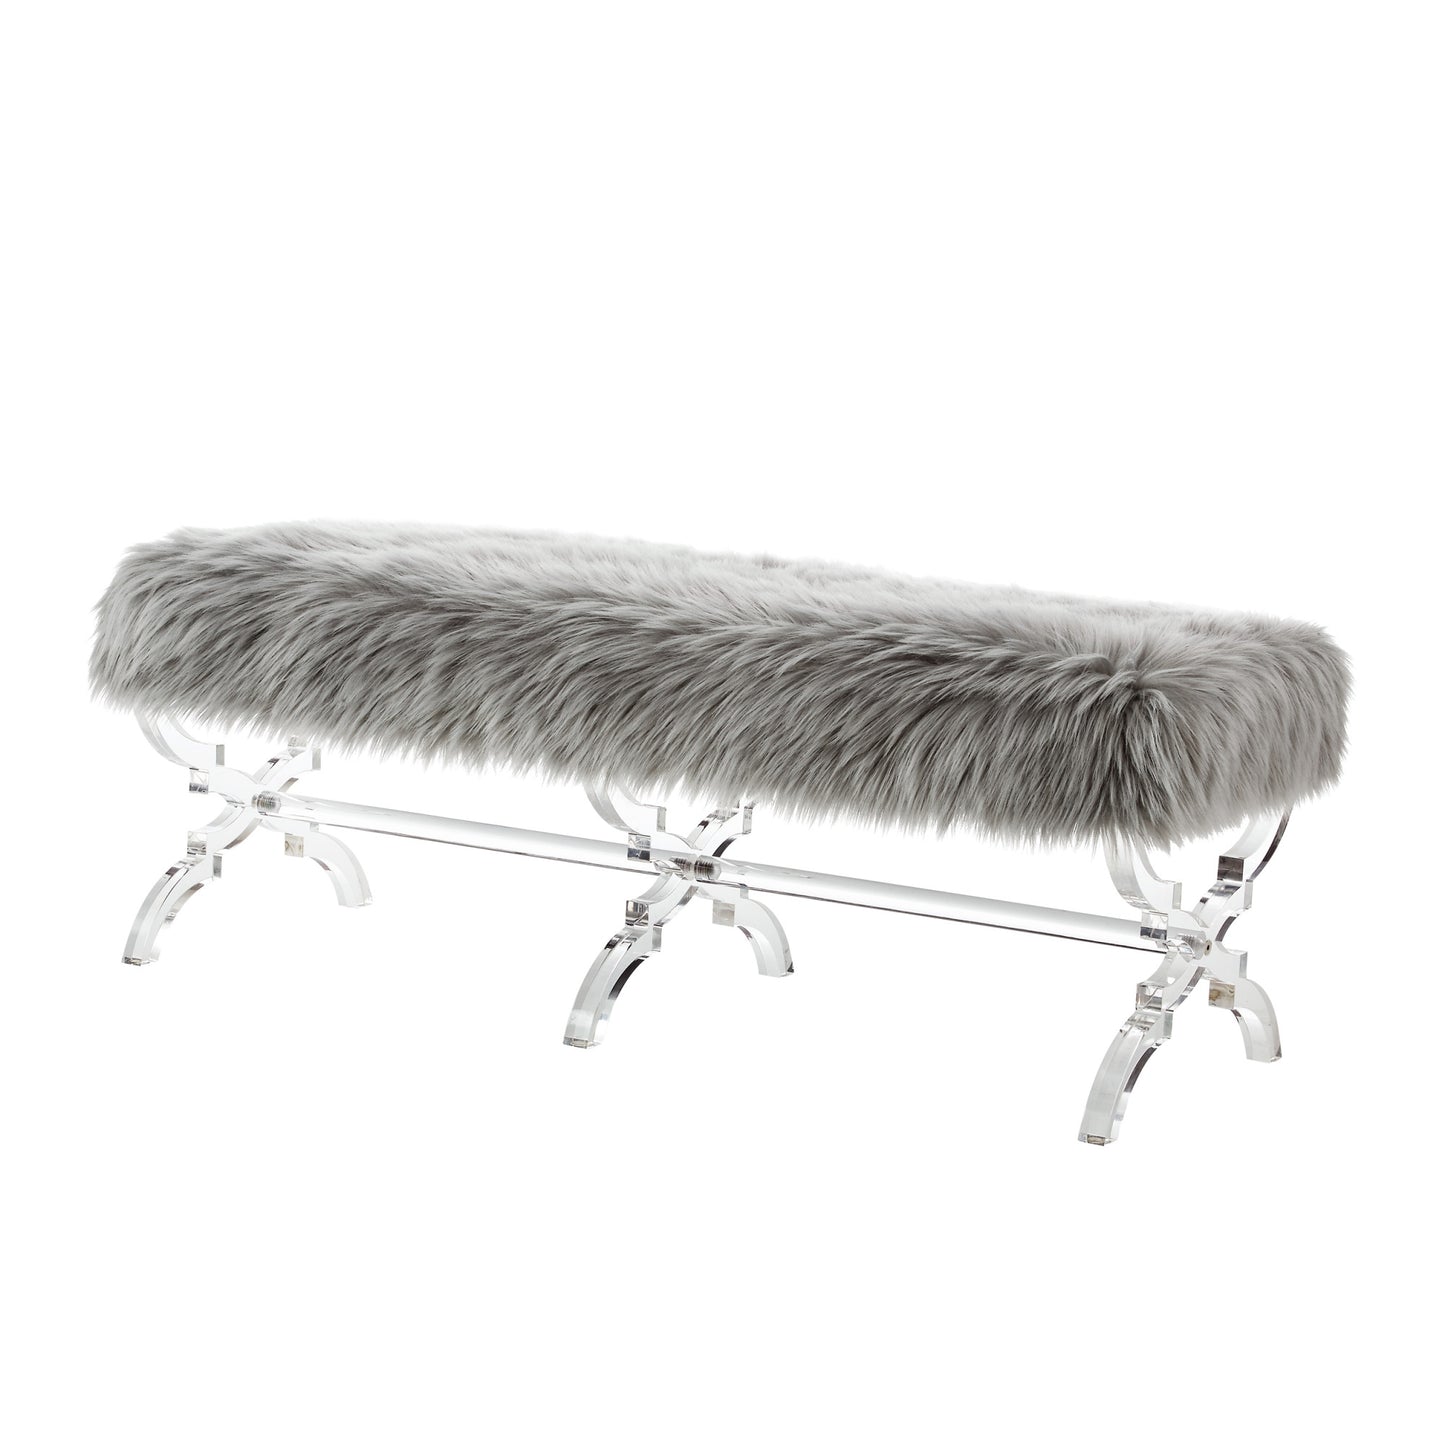 48" Rose And Clear Upholstered Faux Fur Bench